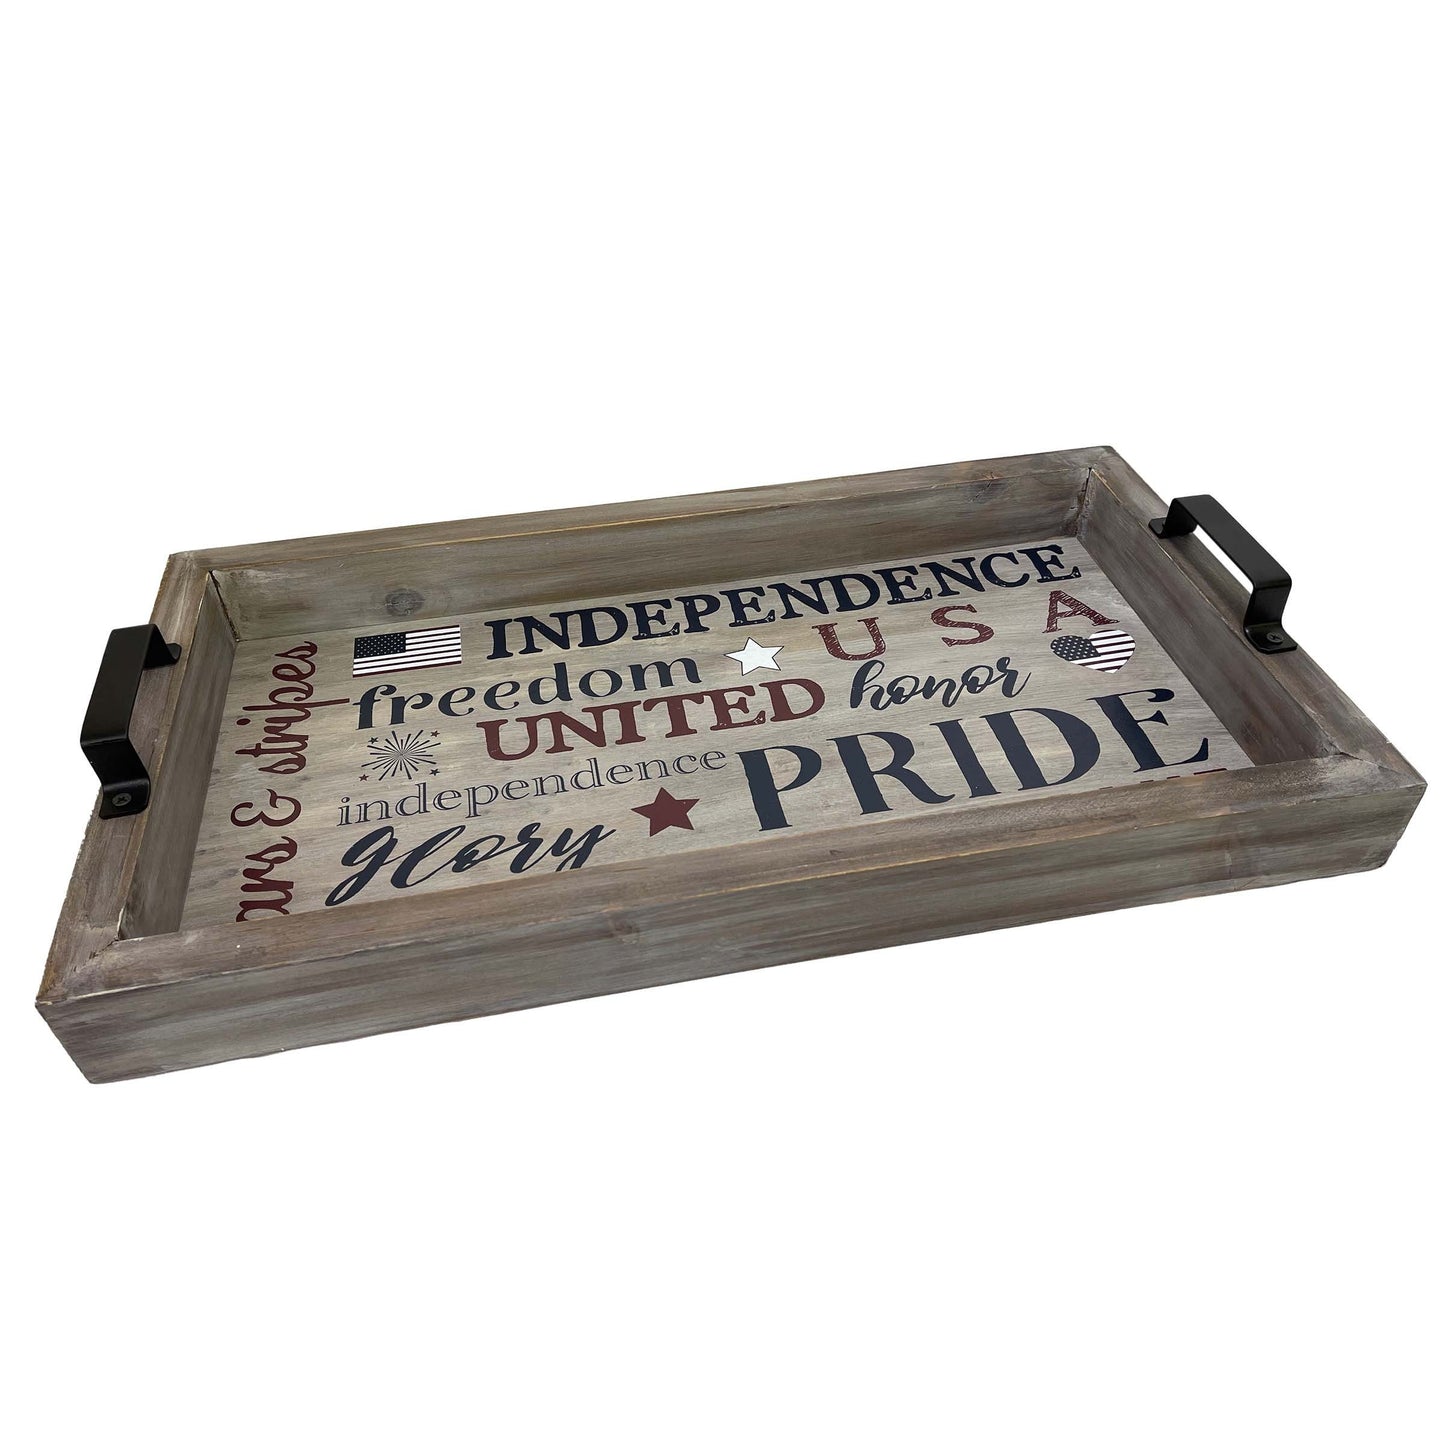 Pride Wood Serving Tray, Rustic Americana Wooden Trays for Kitchen, Dining Room, or Living Room, 4th of July Platter